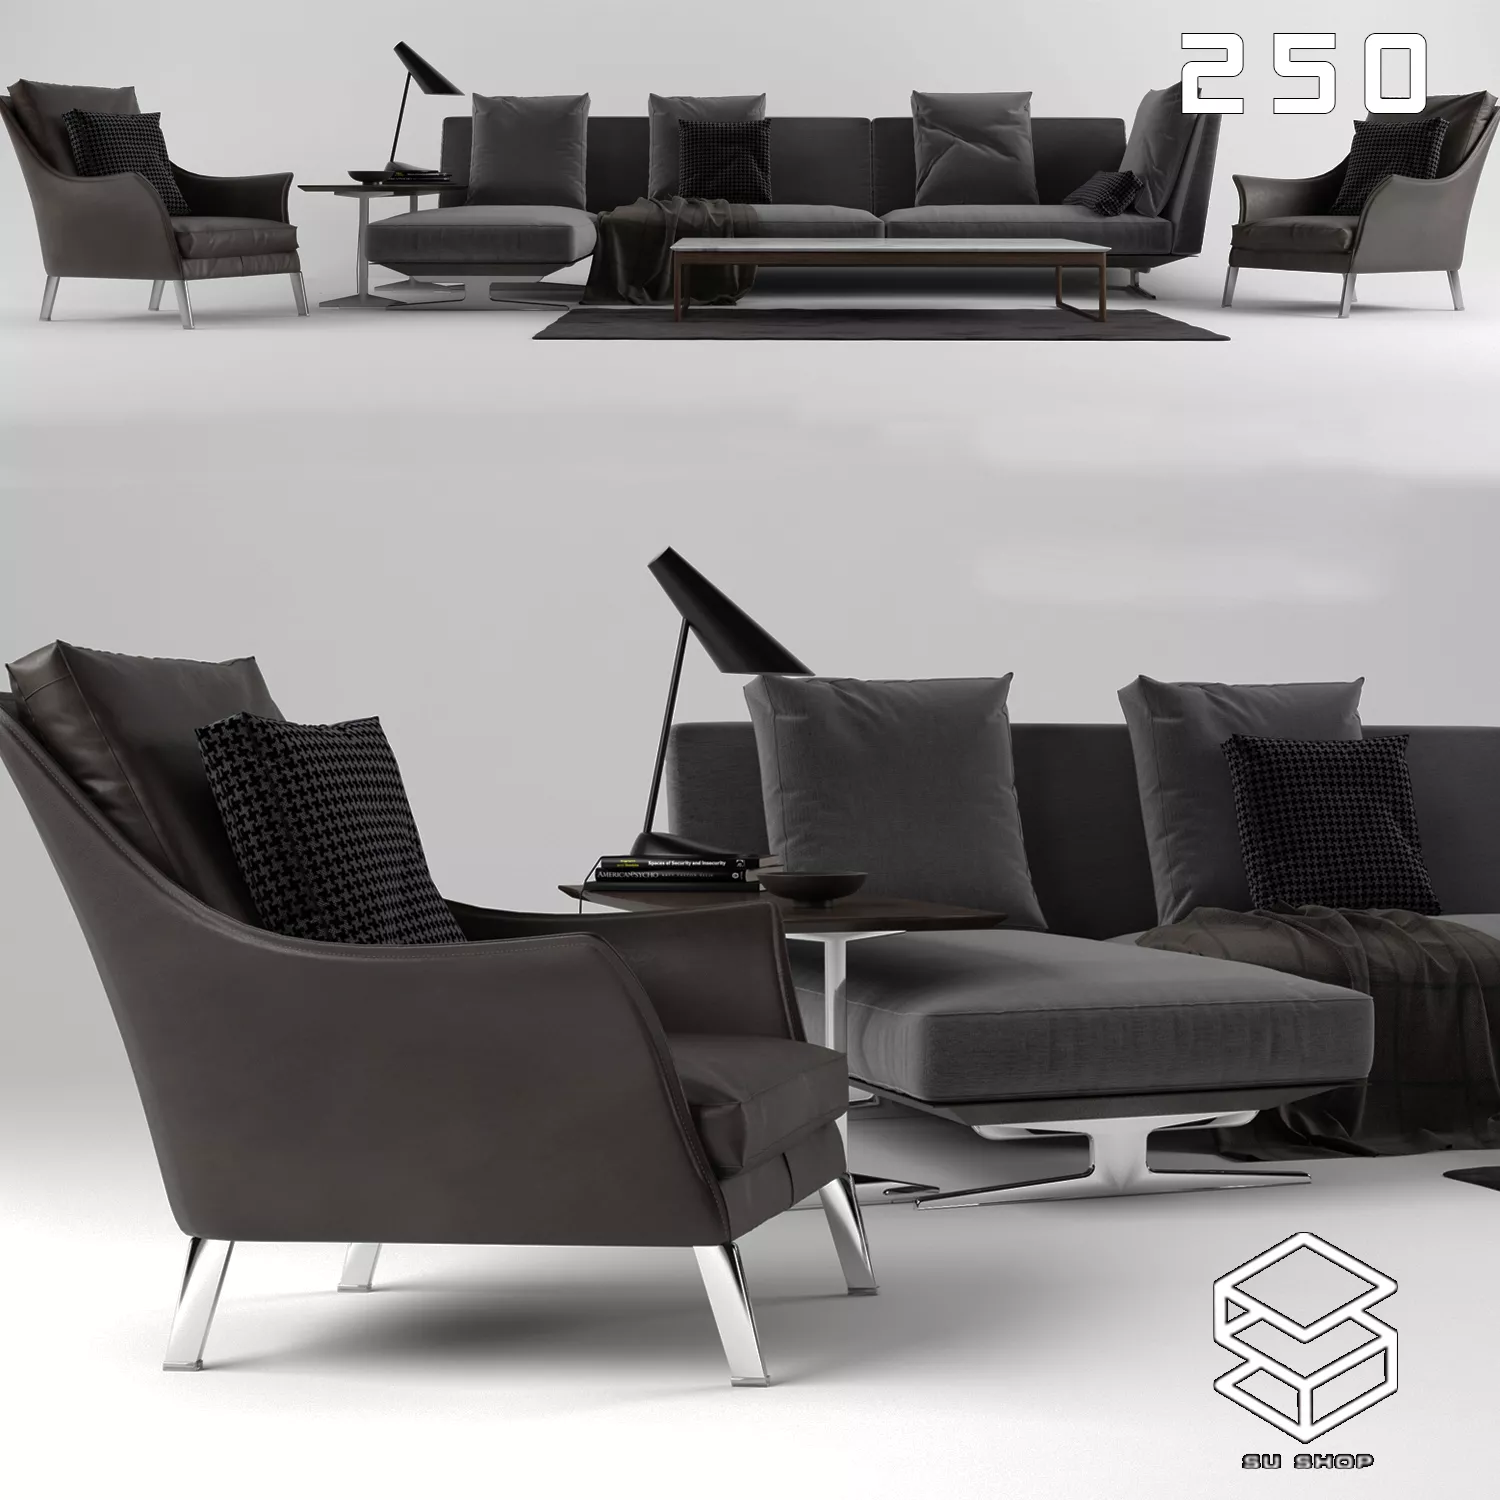 MODERN SOFA - SKETCHUP 3D MODEL - VRAY OR ENSCAPE - ID13553